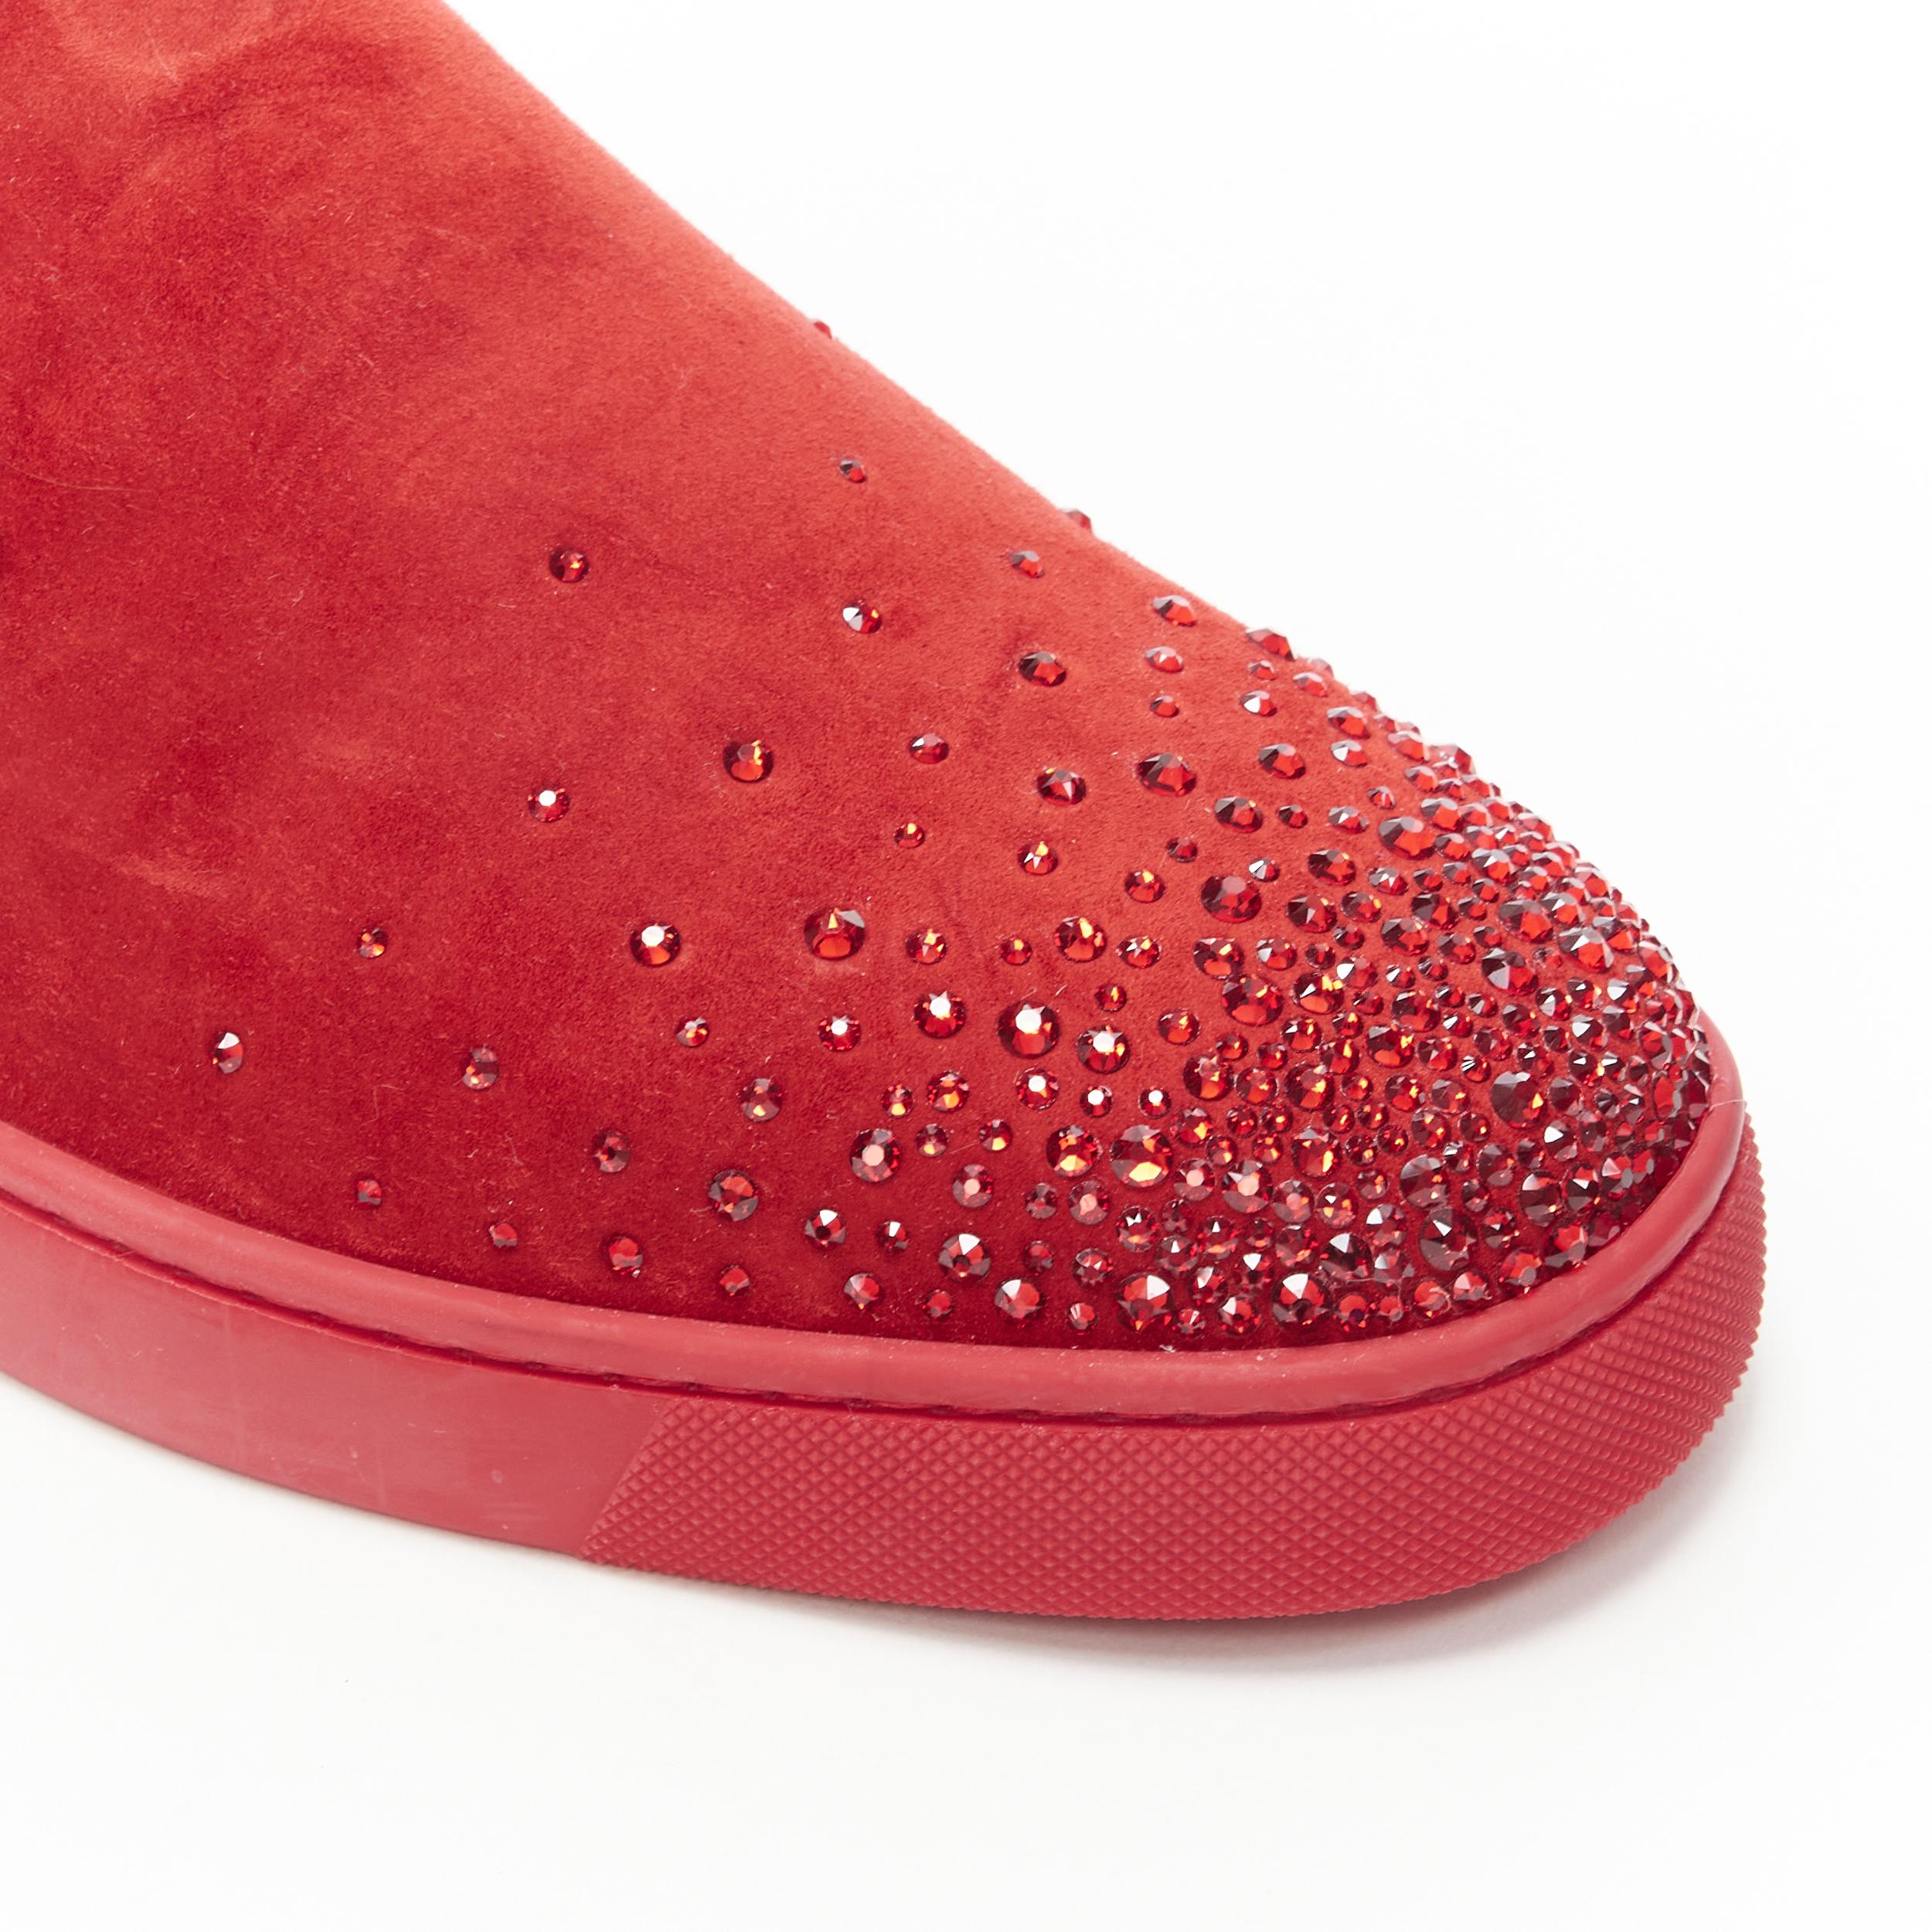 new CHRISTIAN LOUBOUTIN Sailor Boat red suede degrade strass low sneaker EU41.5 
Reference: TGAS/B00254 
Brand: Christian Louboutin 
Designer: Christian Louboutin 
Model: Sailor Boat 
Material: Suede 
Color: Red 
Pattern: Solid 
Closure: Slip on